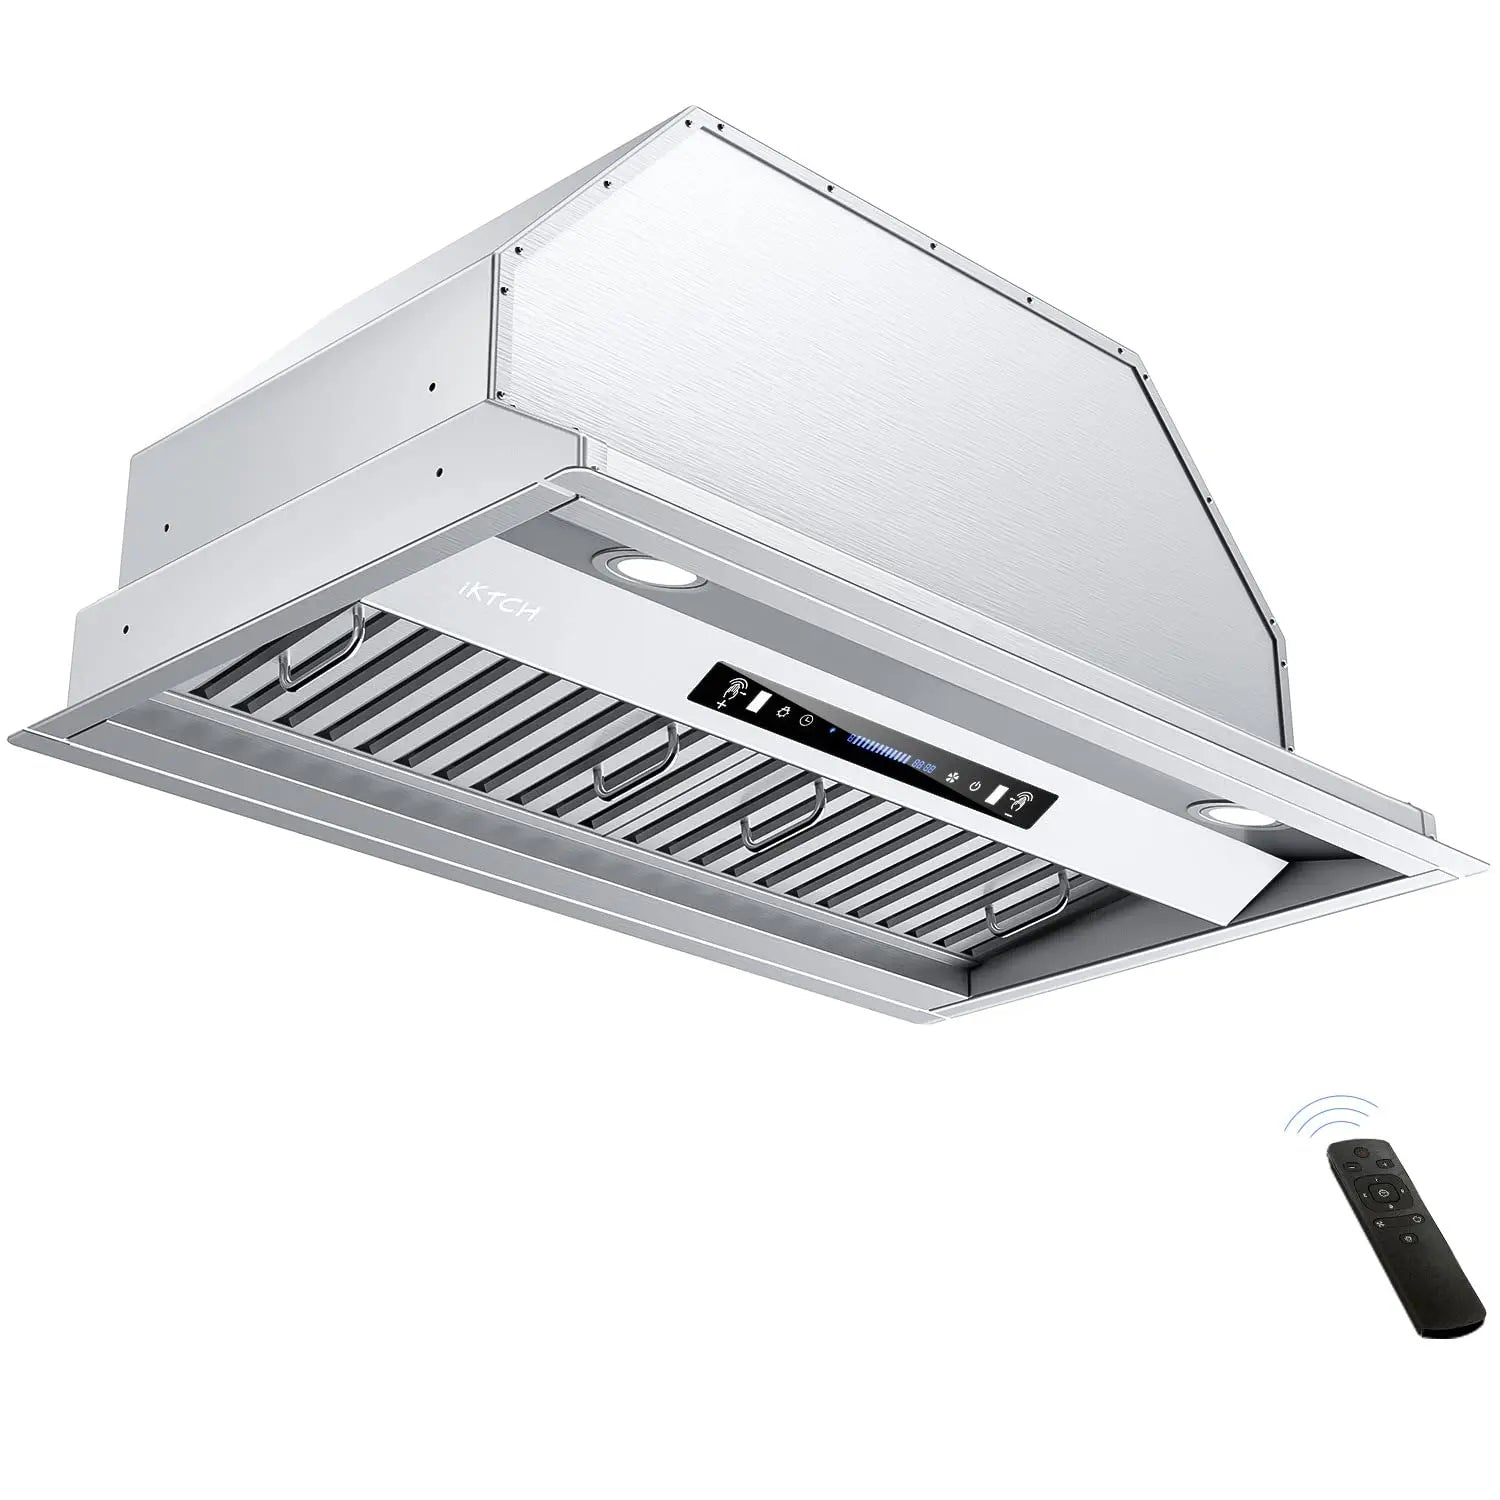 IKTCH 28 in. 900 CFM Ducted Insert with LED 4 Speed Gesture Sensing and Touch Control Panel Range Hood in Stainless Steel